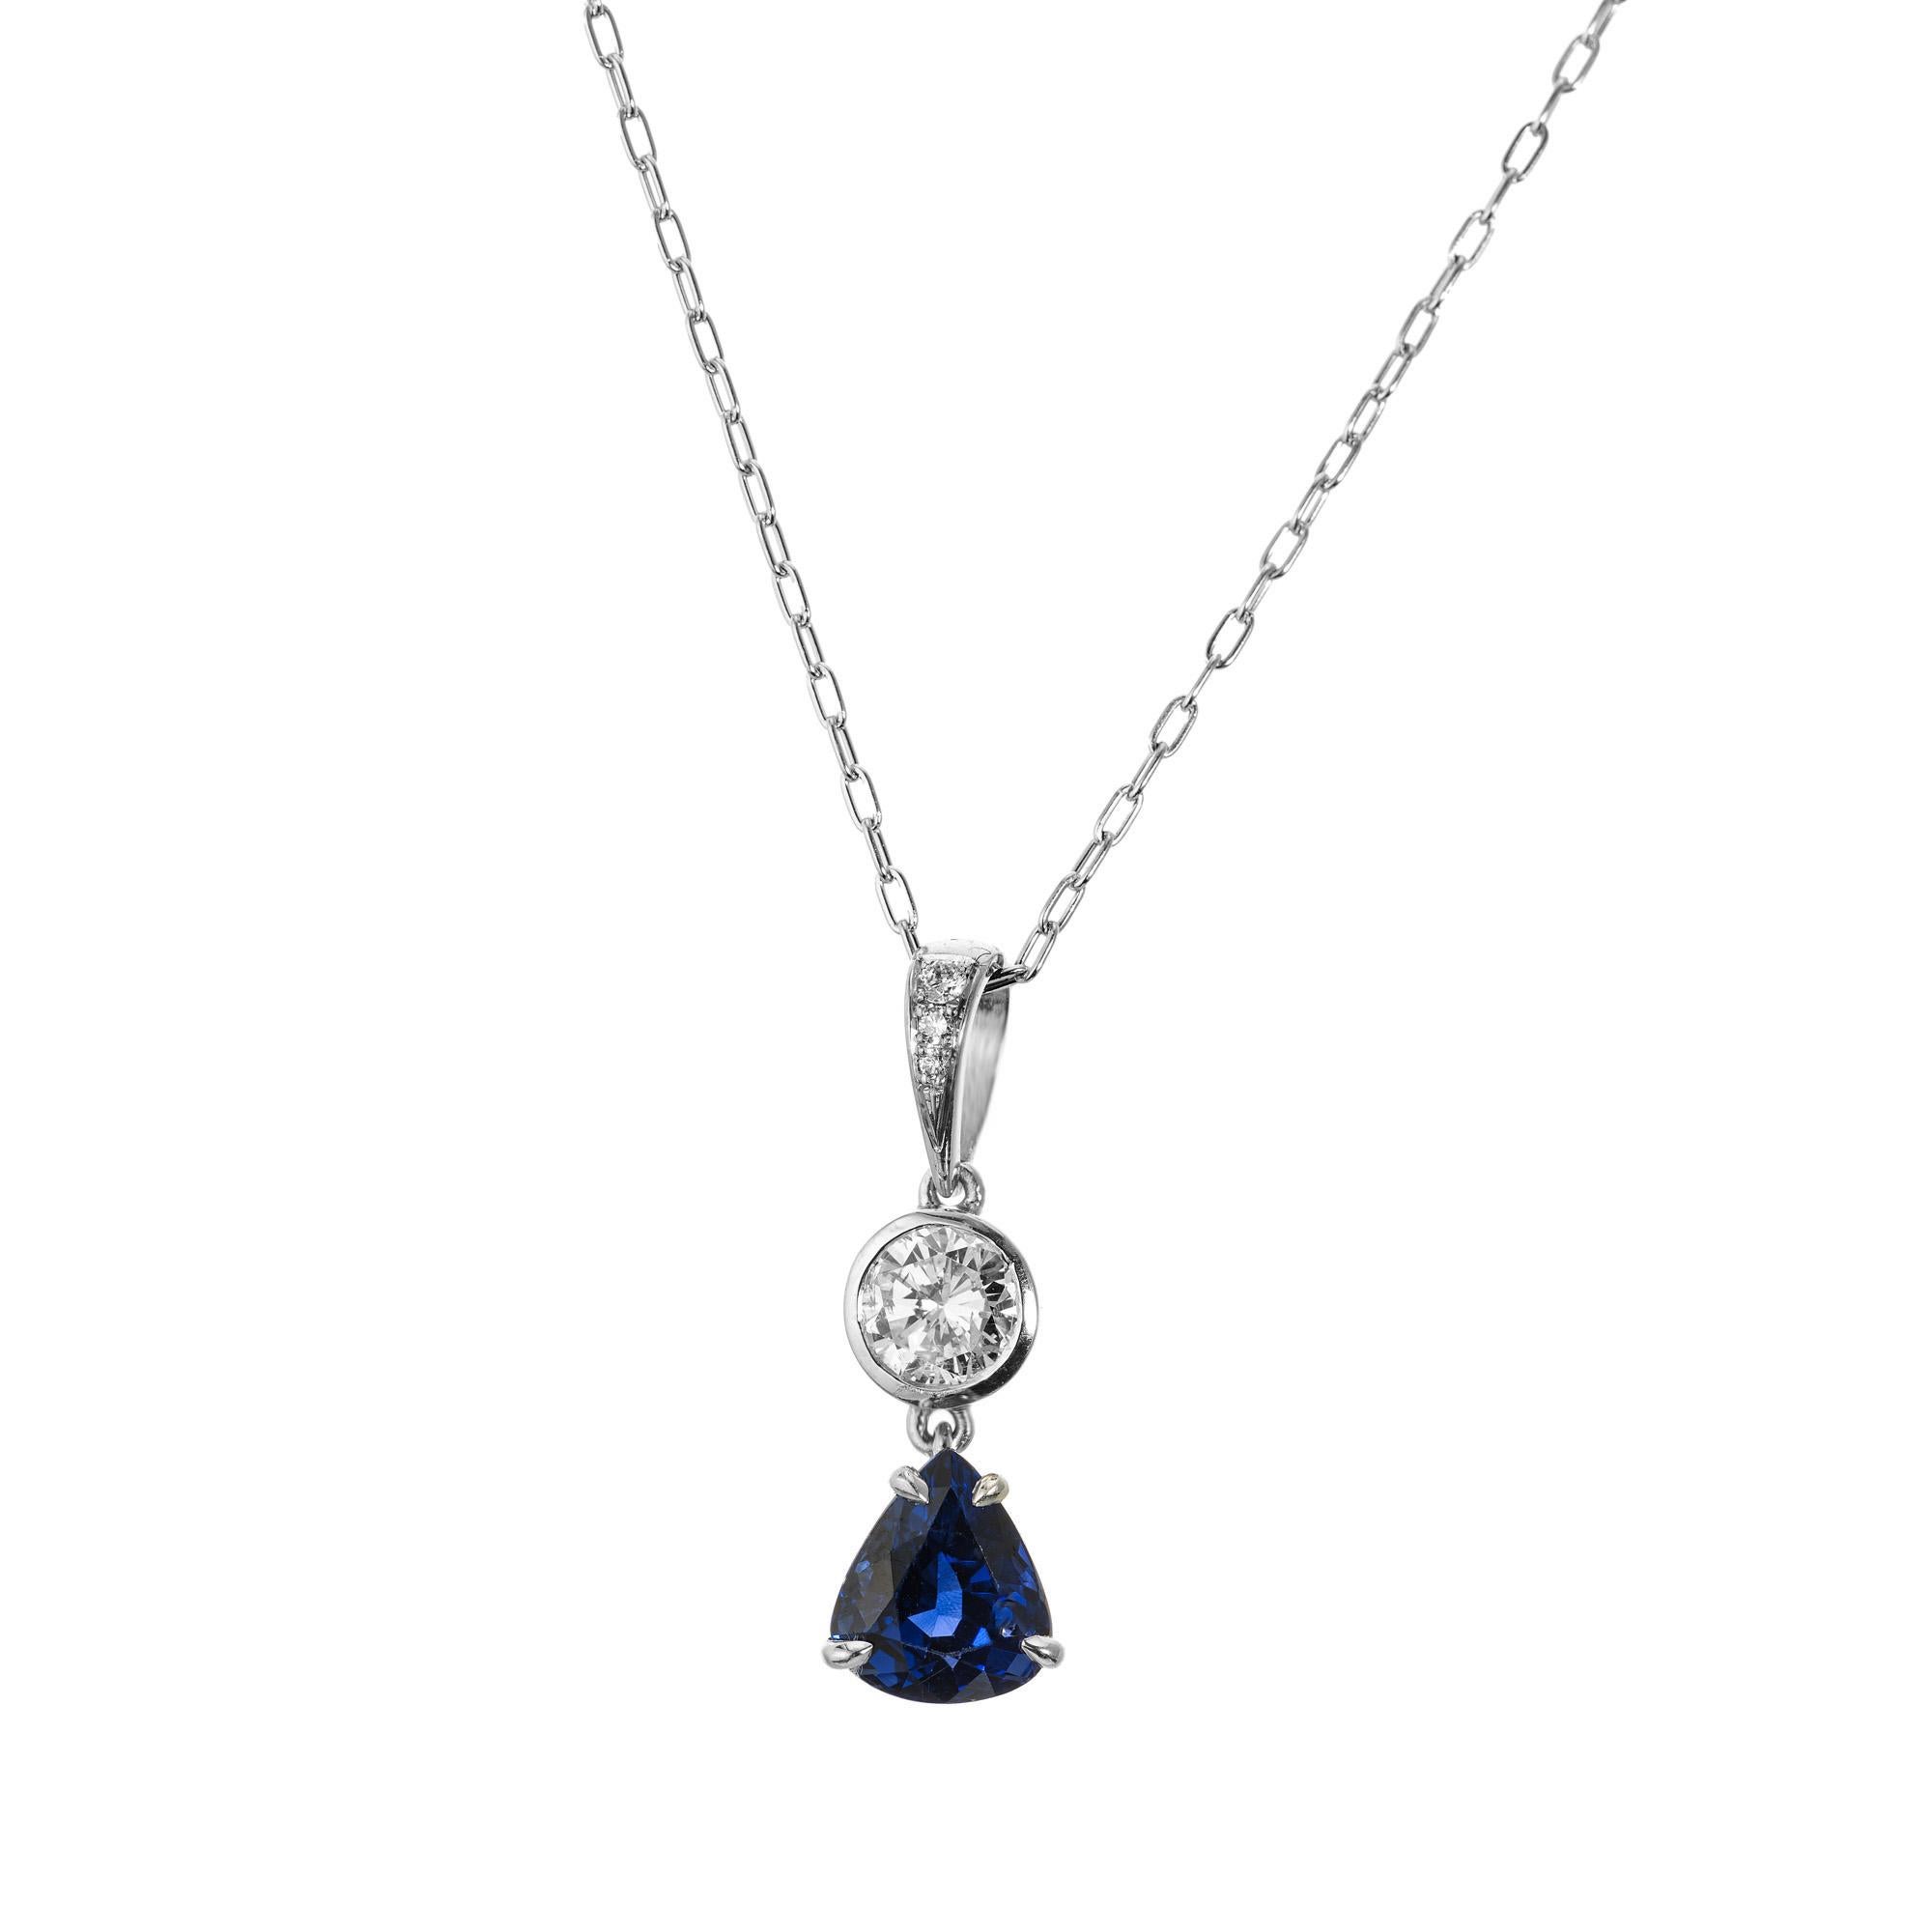 Natural Blue pear sapphire and diamond pendant necklace. The center piece of this necklace is the 1.74ct pear shaped blue sapphire accented by a round brilliant cut bezel set diamond. The bezel is also adorned with three full cut diamonds. The